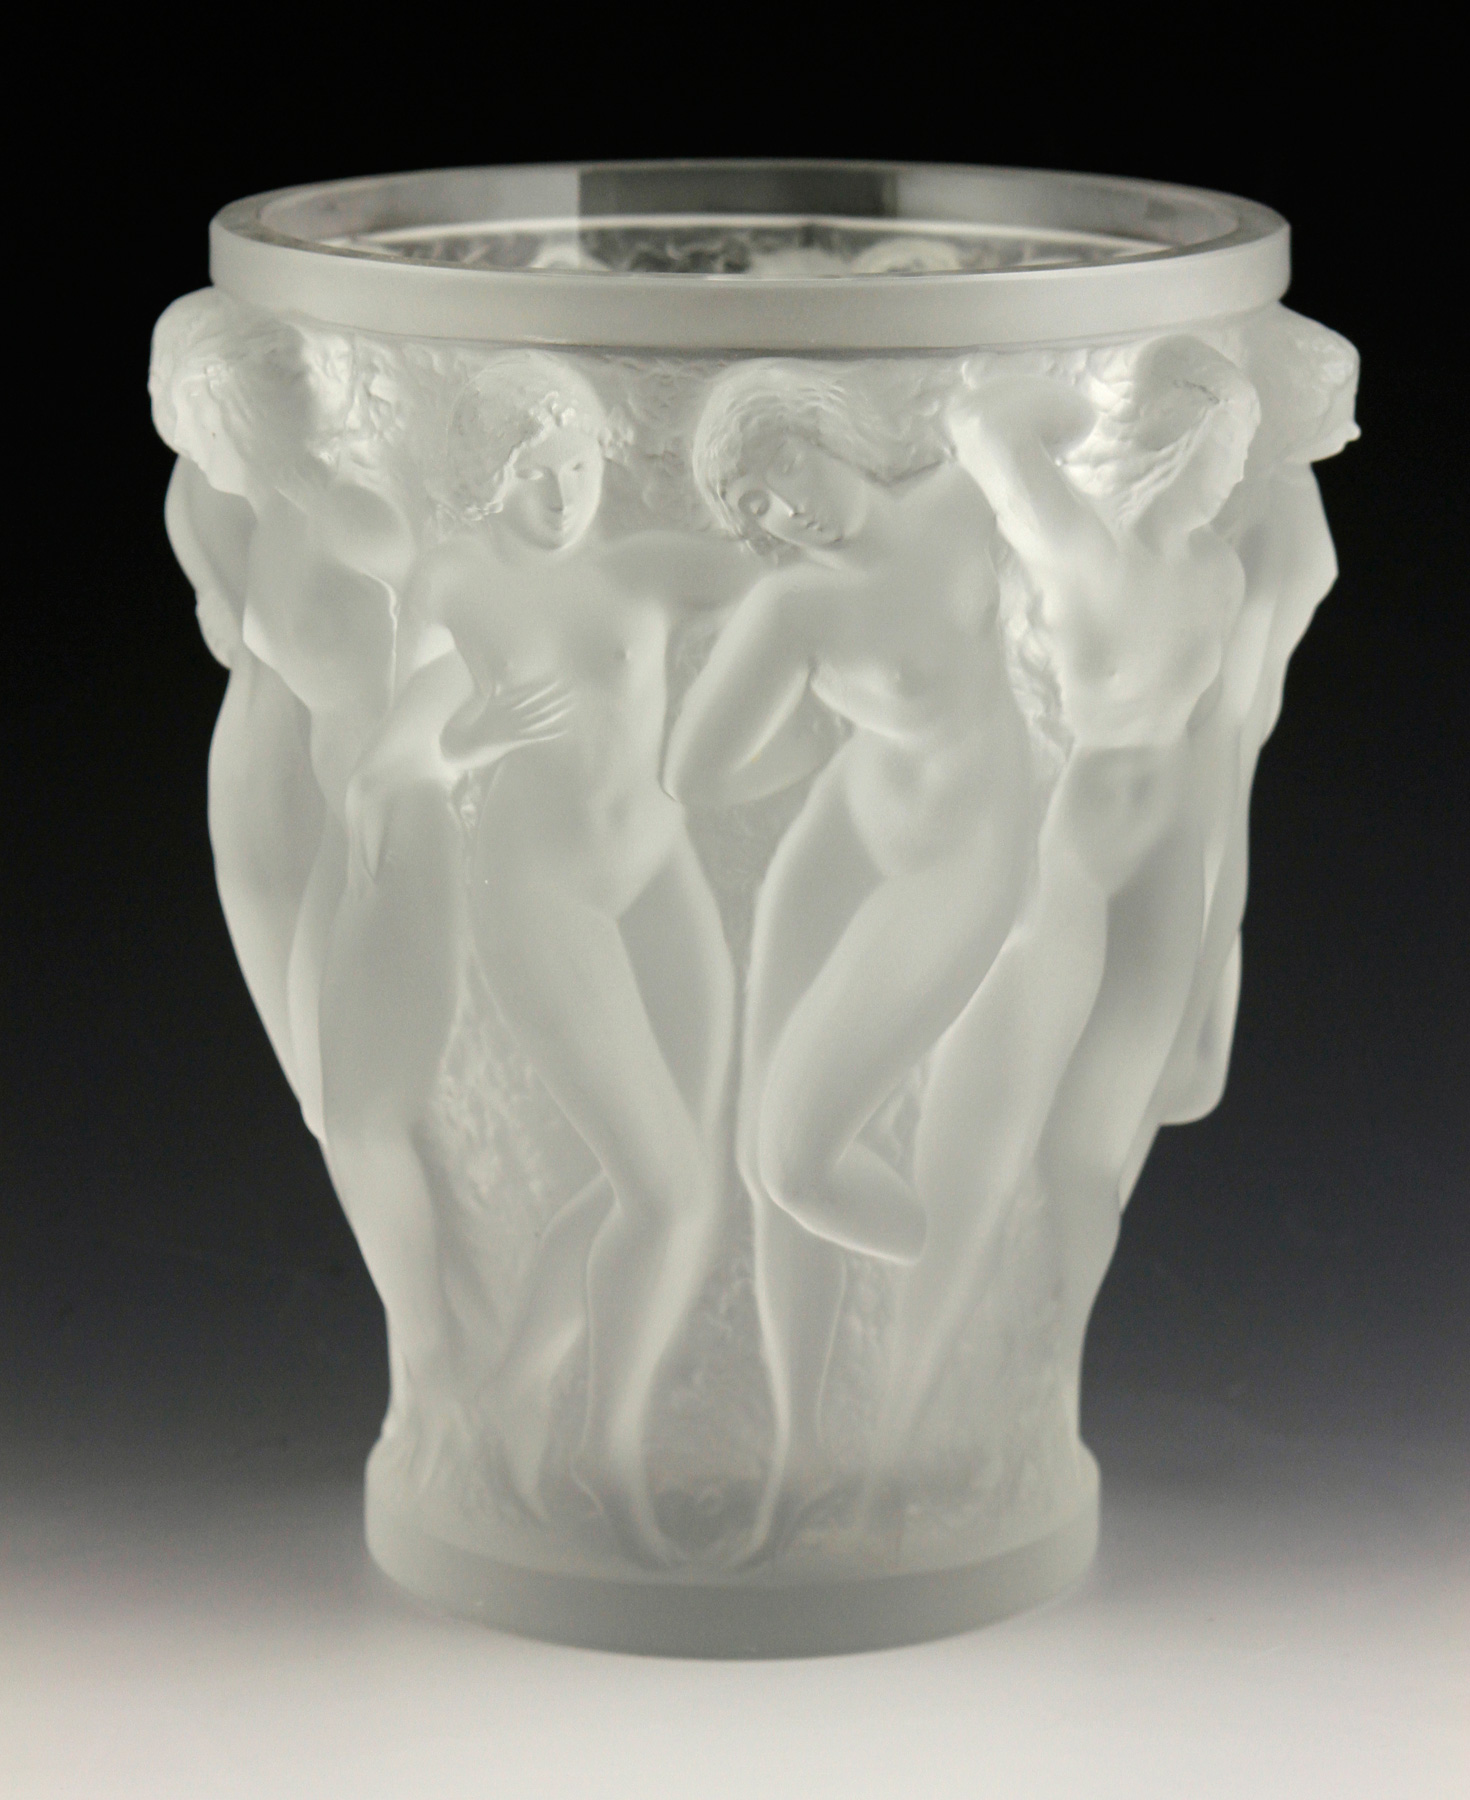 Mid 20th century Lalique "Bacchantes" vase, #12200, French, cast colorless glass, marked "Lalique France"